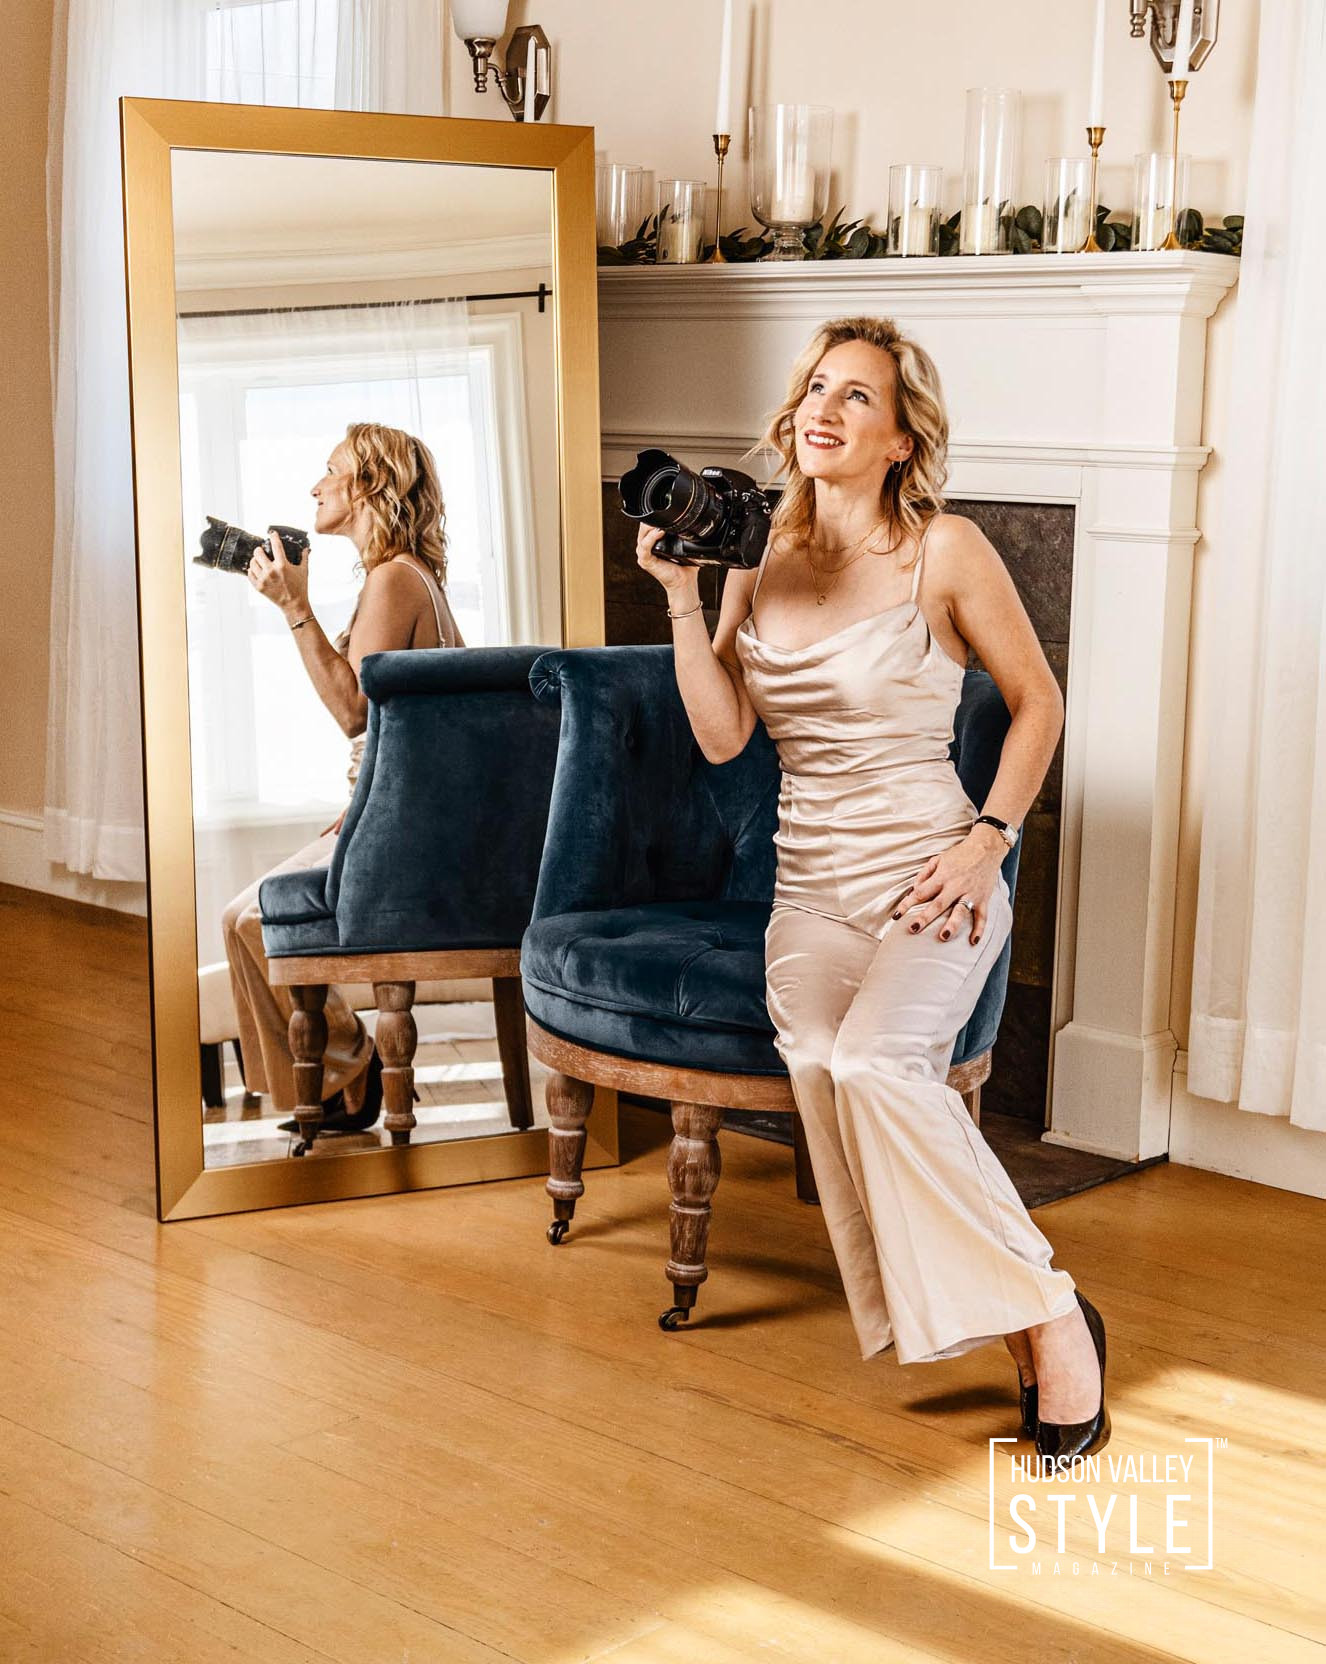 Exclusive Interview with Hudson Valley Boudoir Photographer Leyla Cadabal – by Dino Alexander, Contributing Editor – Photography by Maxwell Alexander (Duncan Avenue Studios)